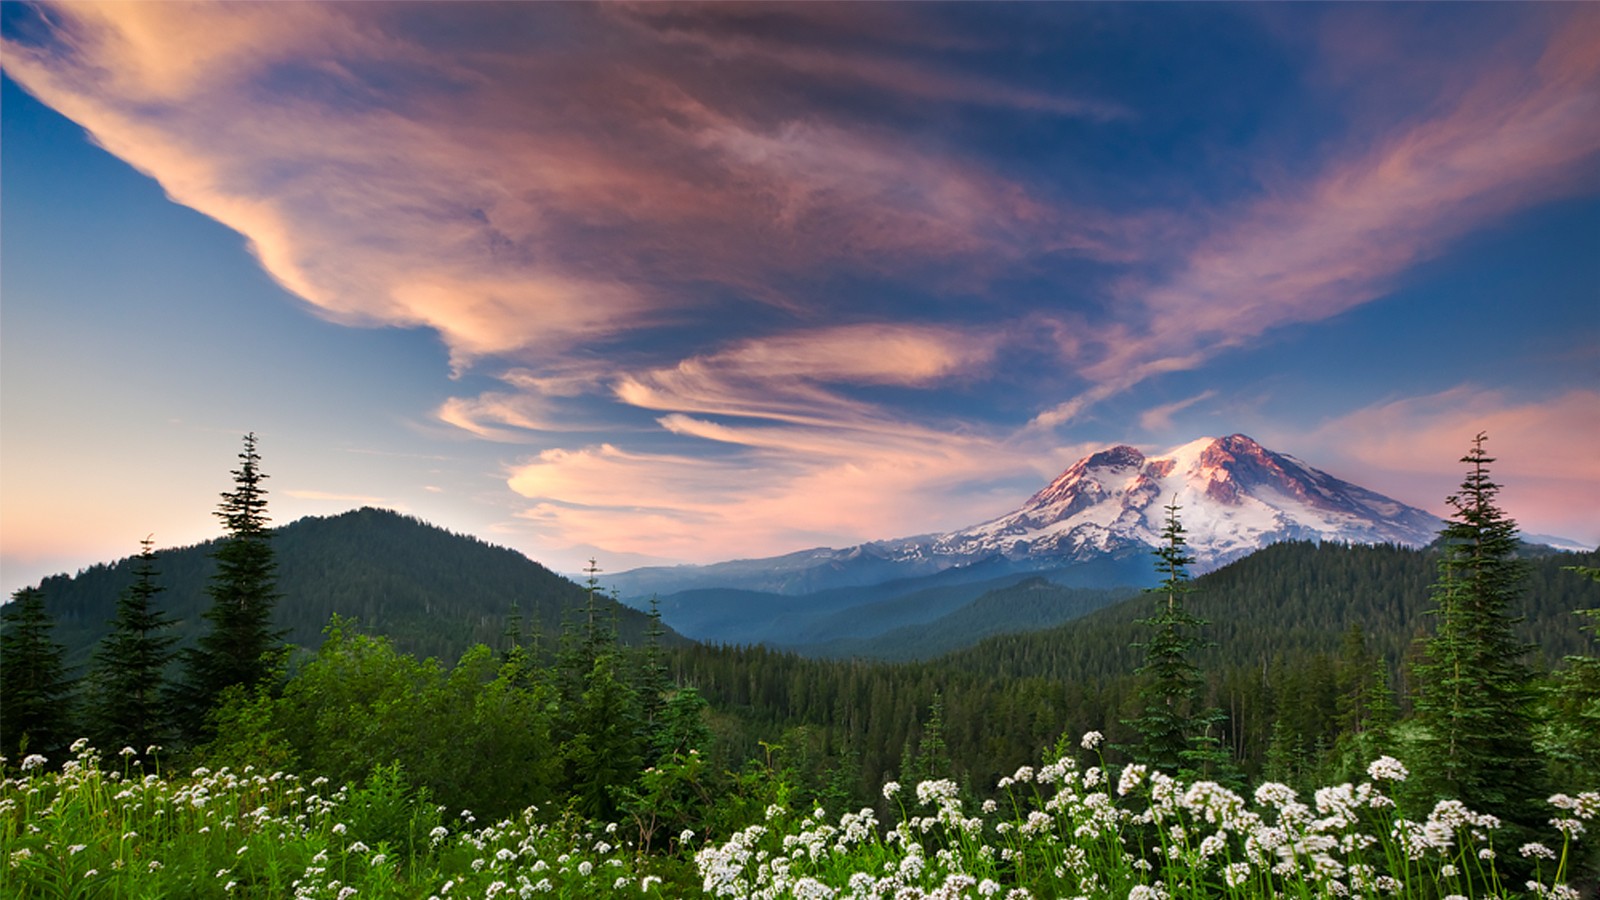 Wildflowers Forest Mountains Sunset Clouds Snowy Peak Nature Landscape 1600x900